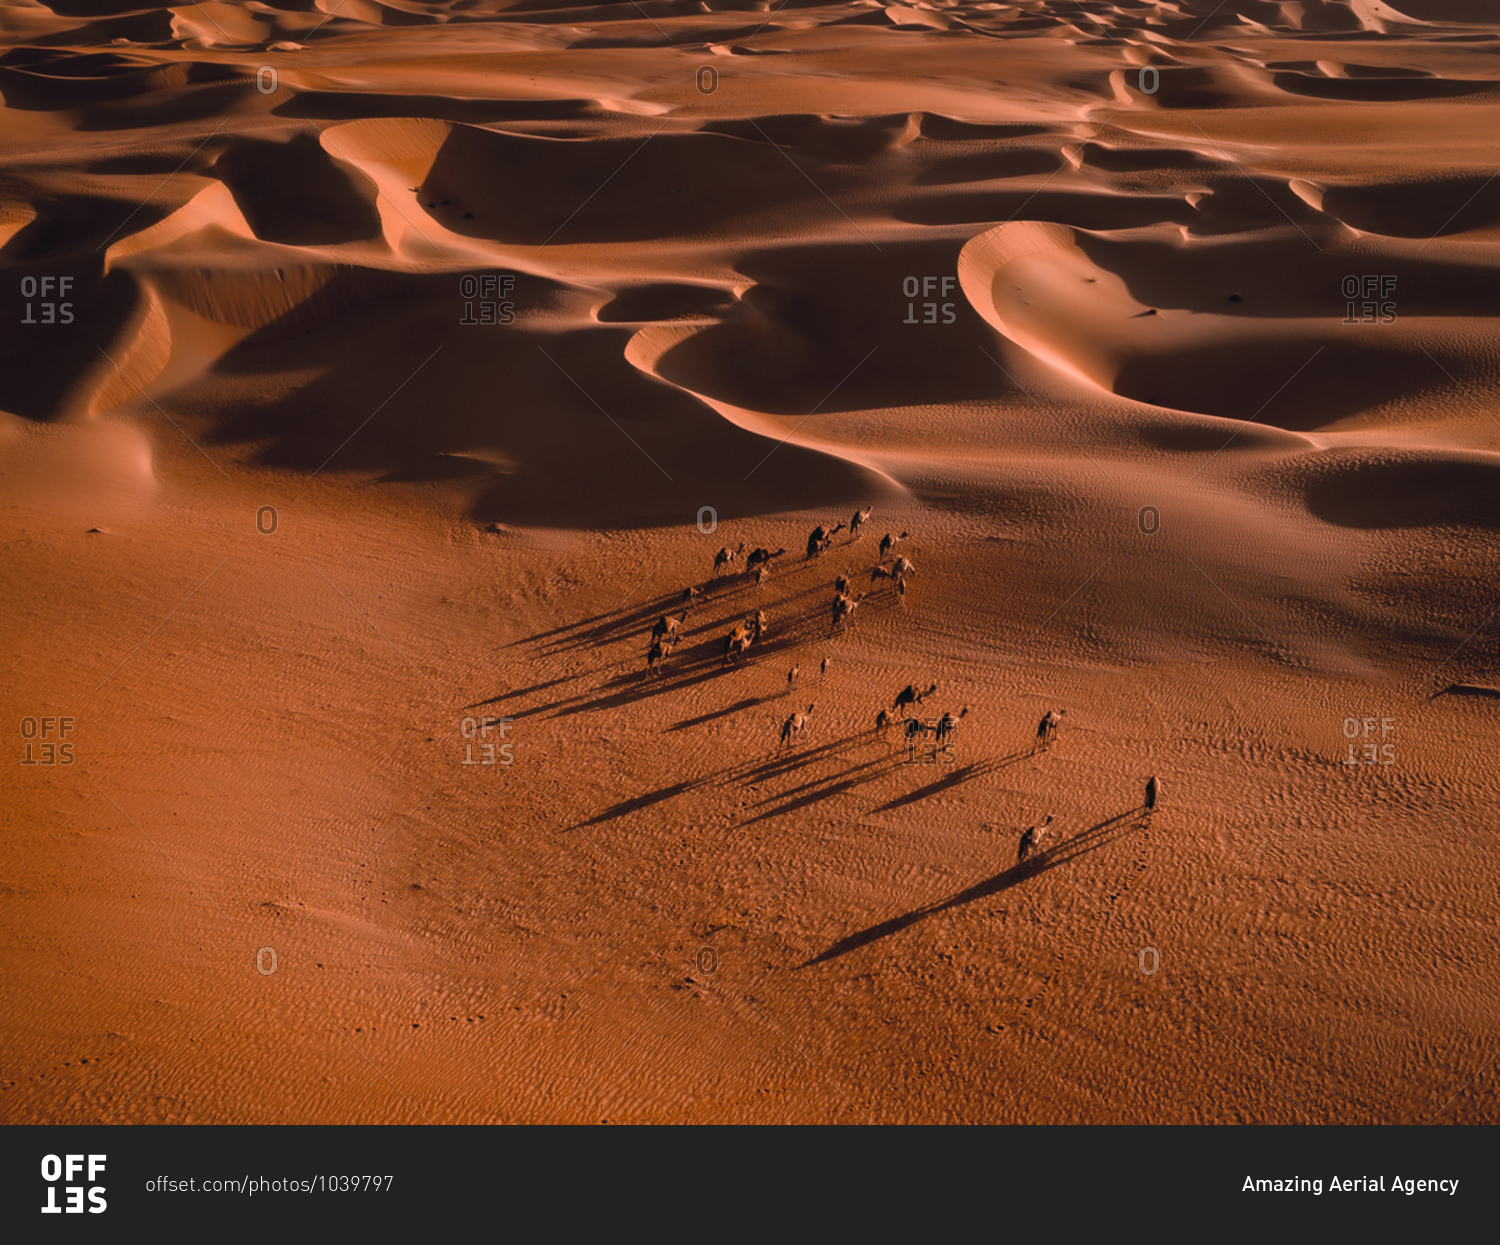 Aerial abstract view of camels and their shadows in the sand dunes of Abu Dhabi, United Arab Emirates.